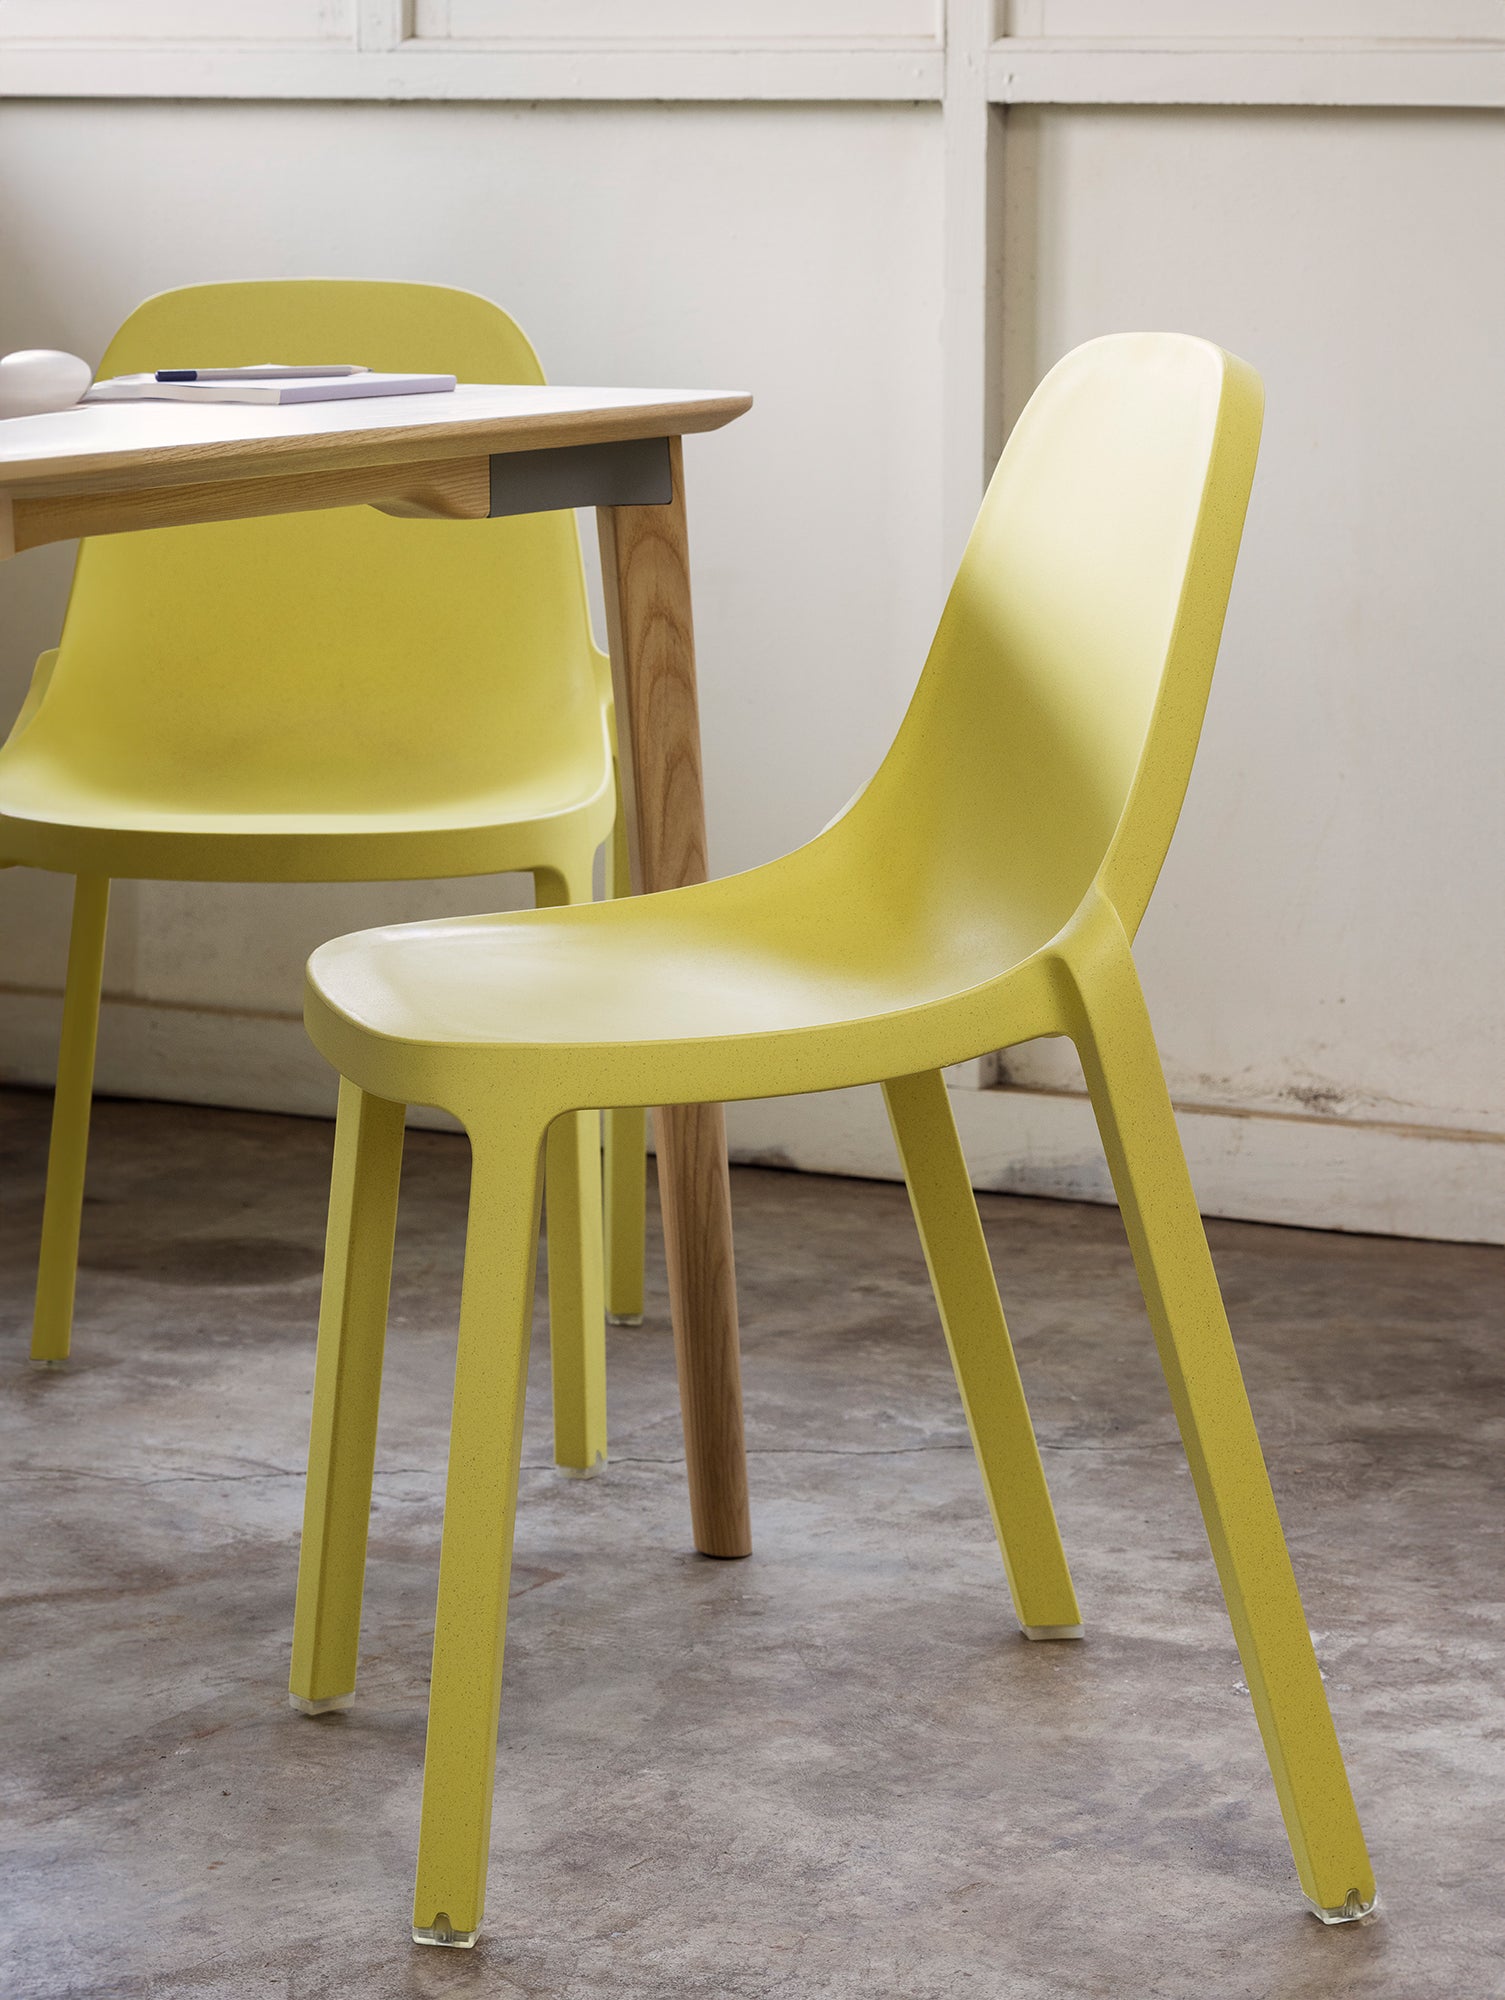 Emeco  Broom Stacking Chair - Butter Yellow